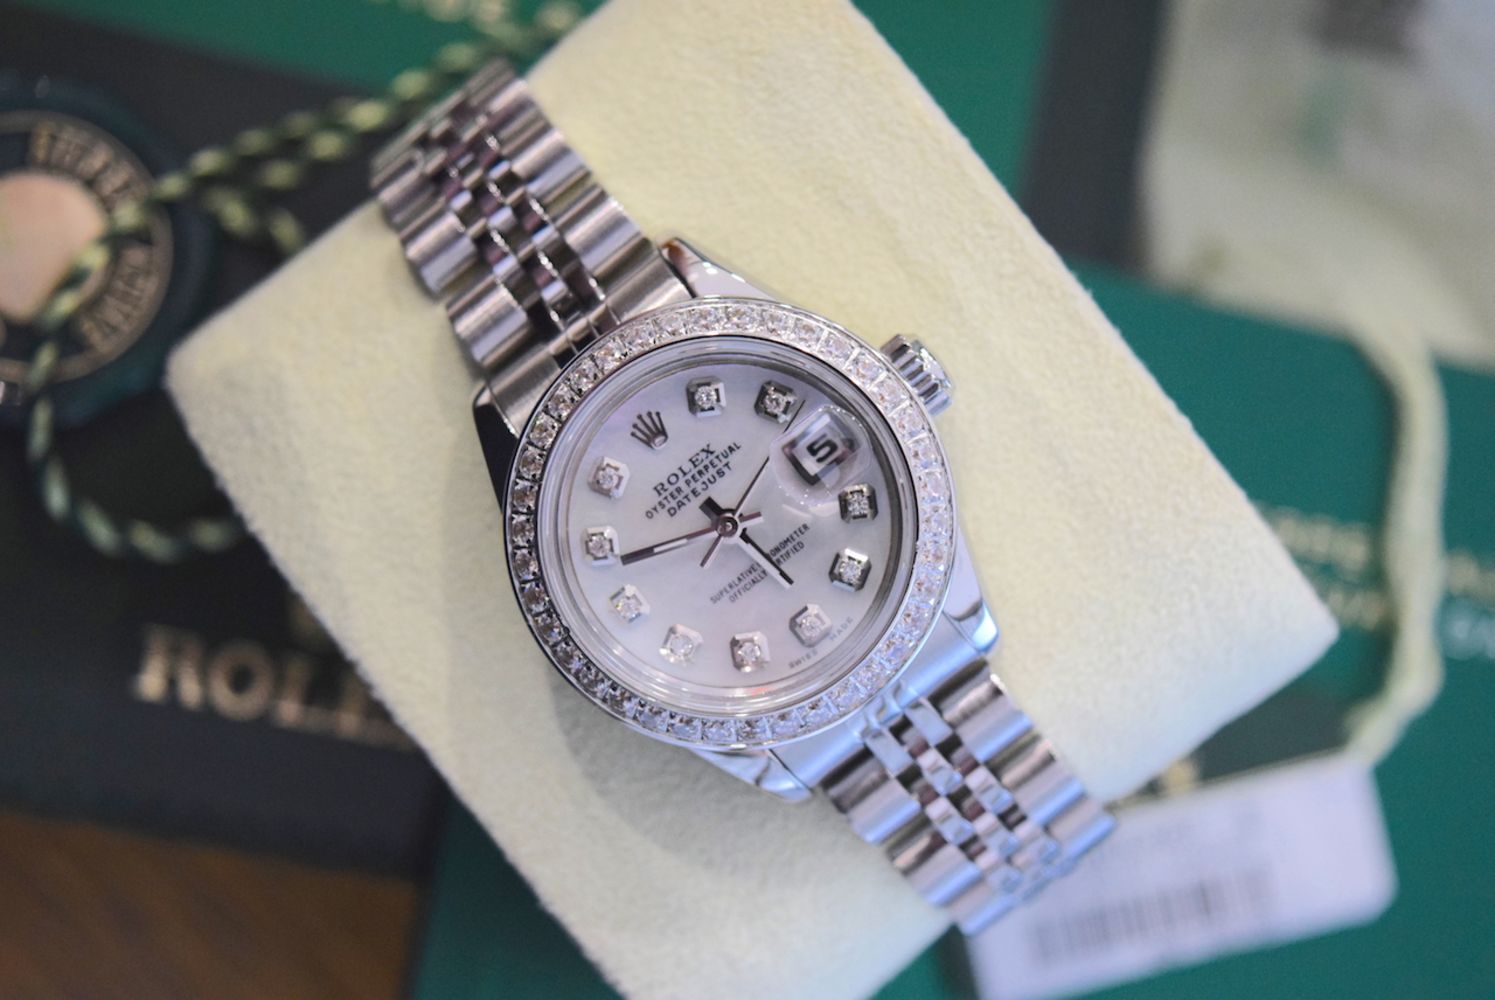 7 DAY SPEED AUCTION INC VARIOUS SAFE DEPOSIT ITEMS, LUXURY JEWELLERY & WATCHES